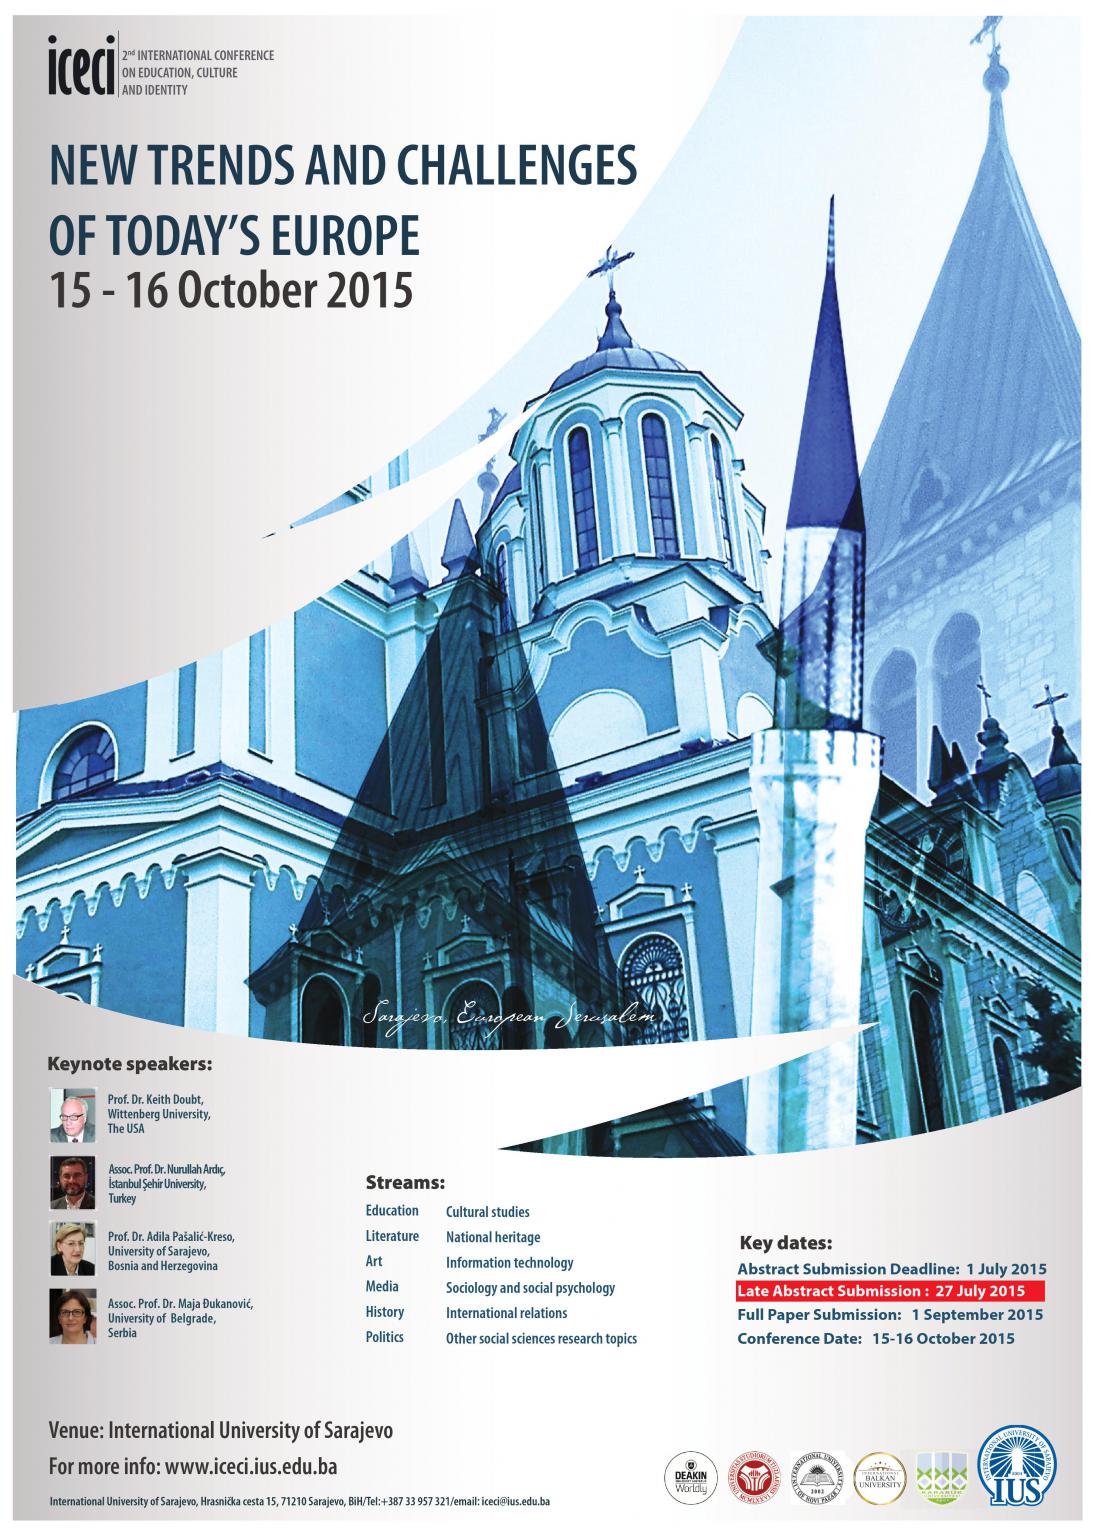  NEW TRENDS AND CHALLENGES OF TODAY’S EUROPE 15 - 16 October 2015 